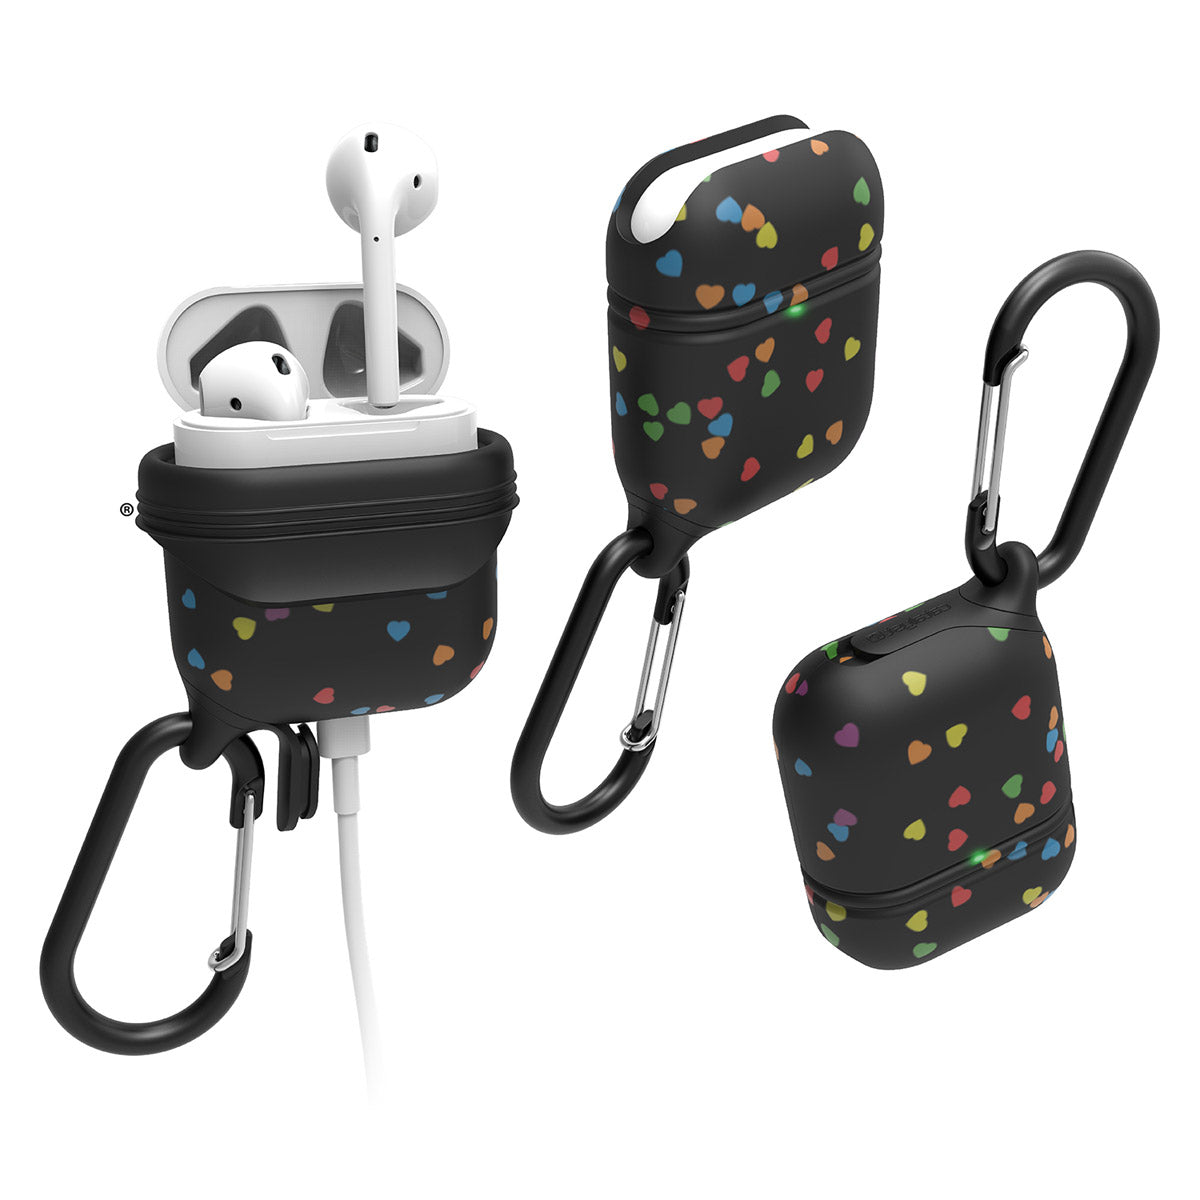 Catalyst Waterproof Case for Airpods Gen 1 & 2 special edition + carabiner showing 3 airpods cases with carabiner attached